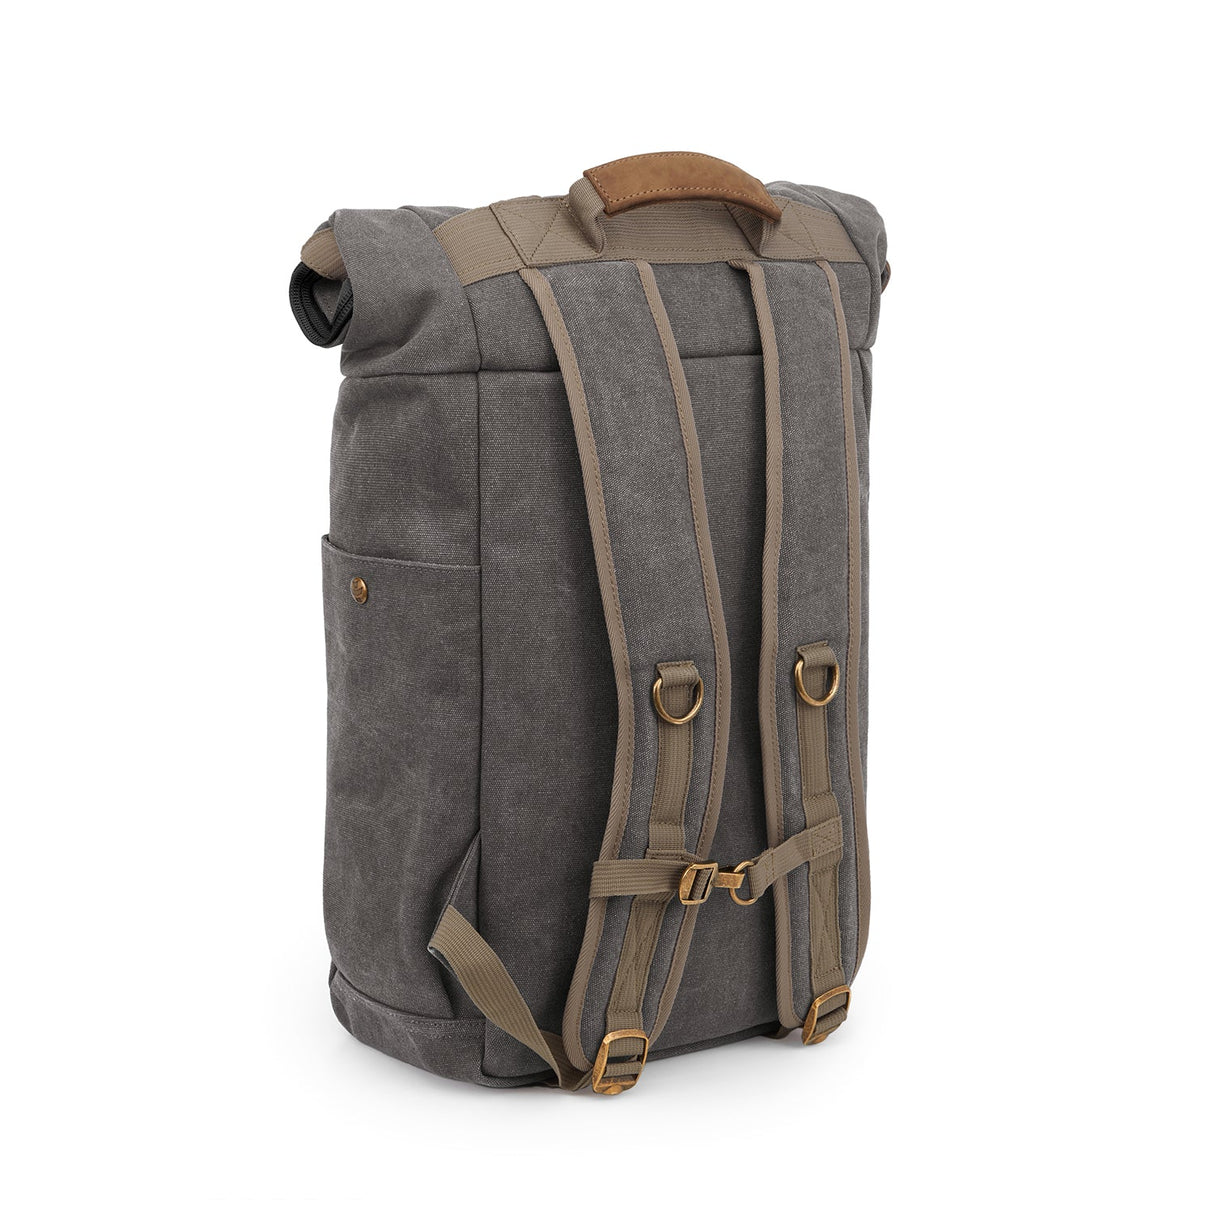 Revelry Supply 'The Drifter' - Smell Proof Rolltop Backpack in Gray - Rear View